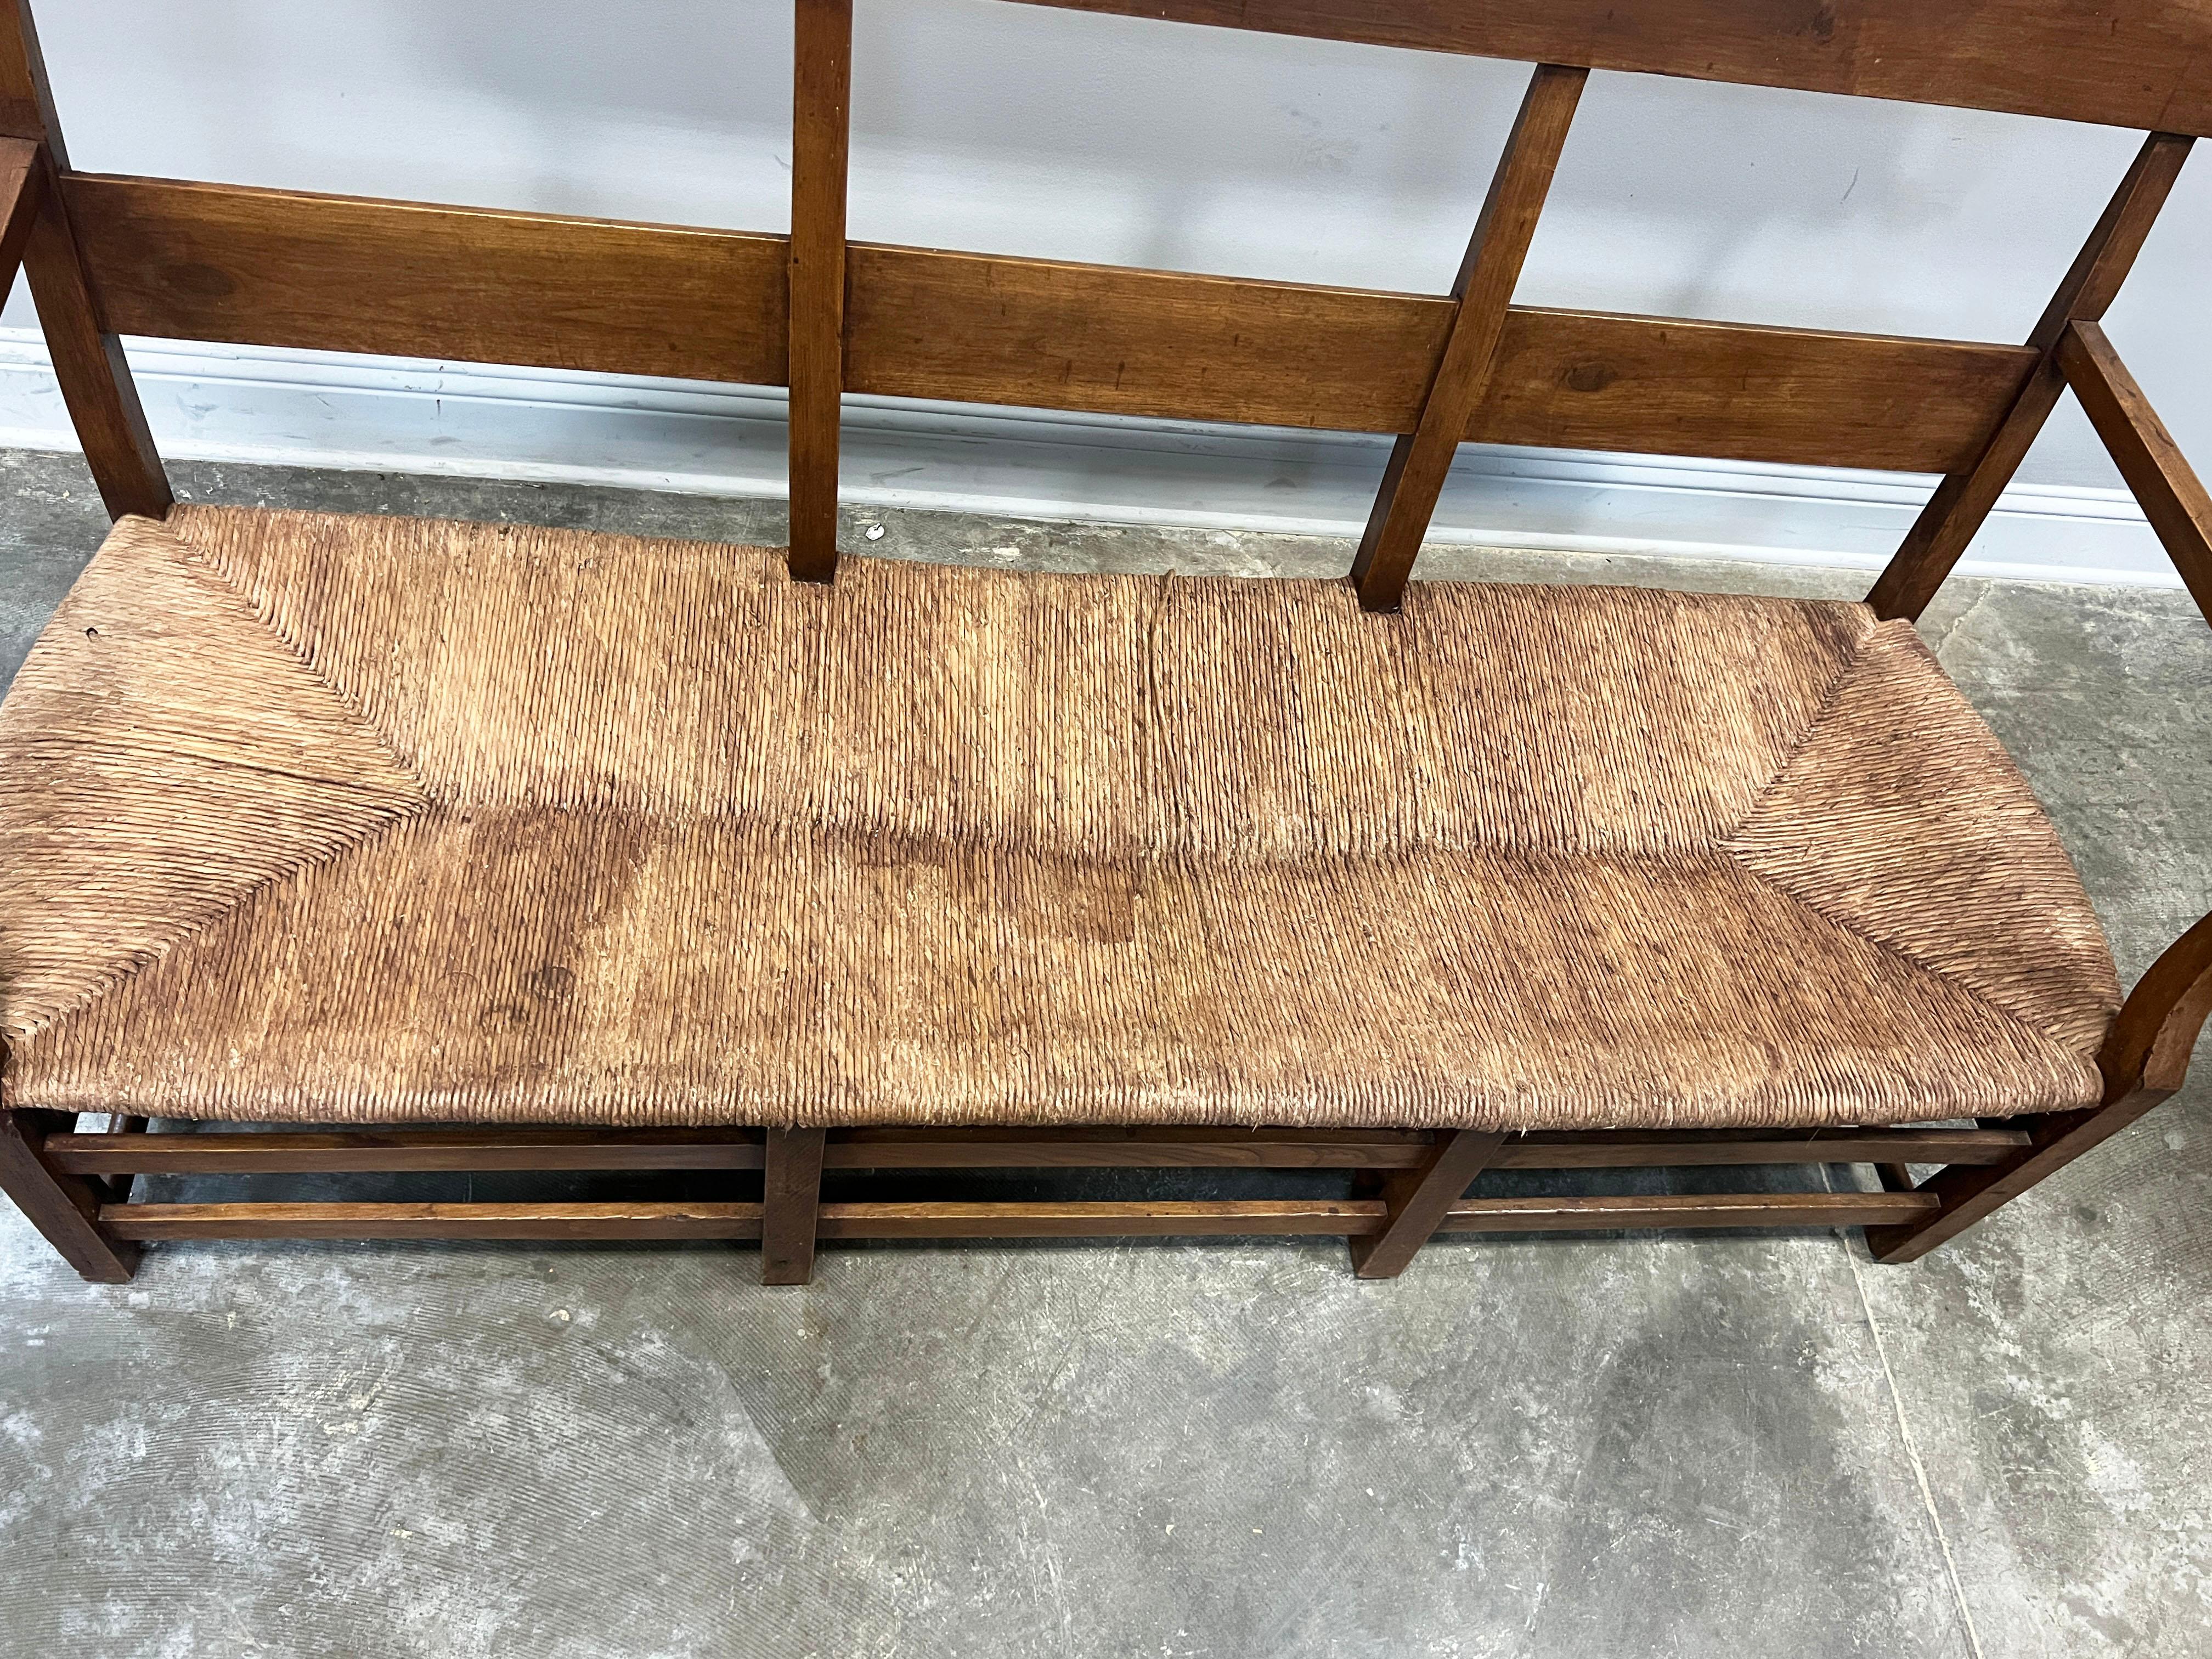 19th century banquette in cherry, warm beautiful patina consistent with its age. Pegged joints and rush seat in good antique condition.